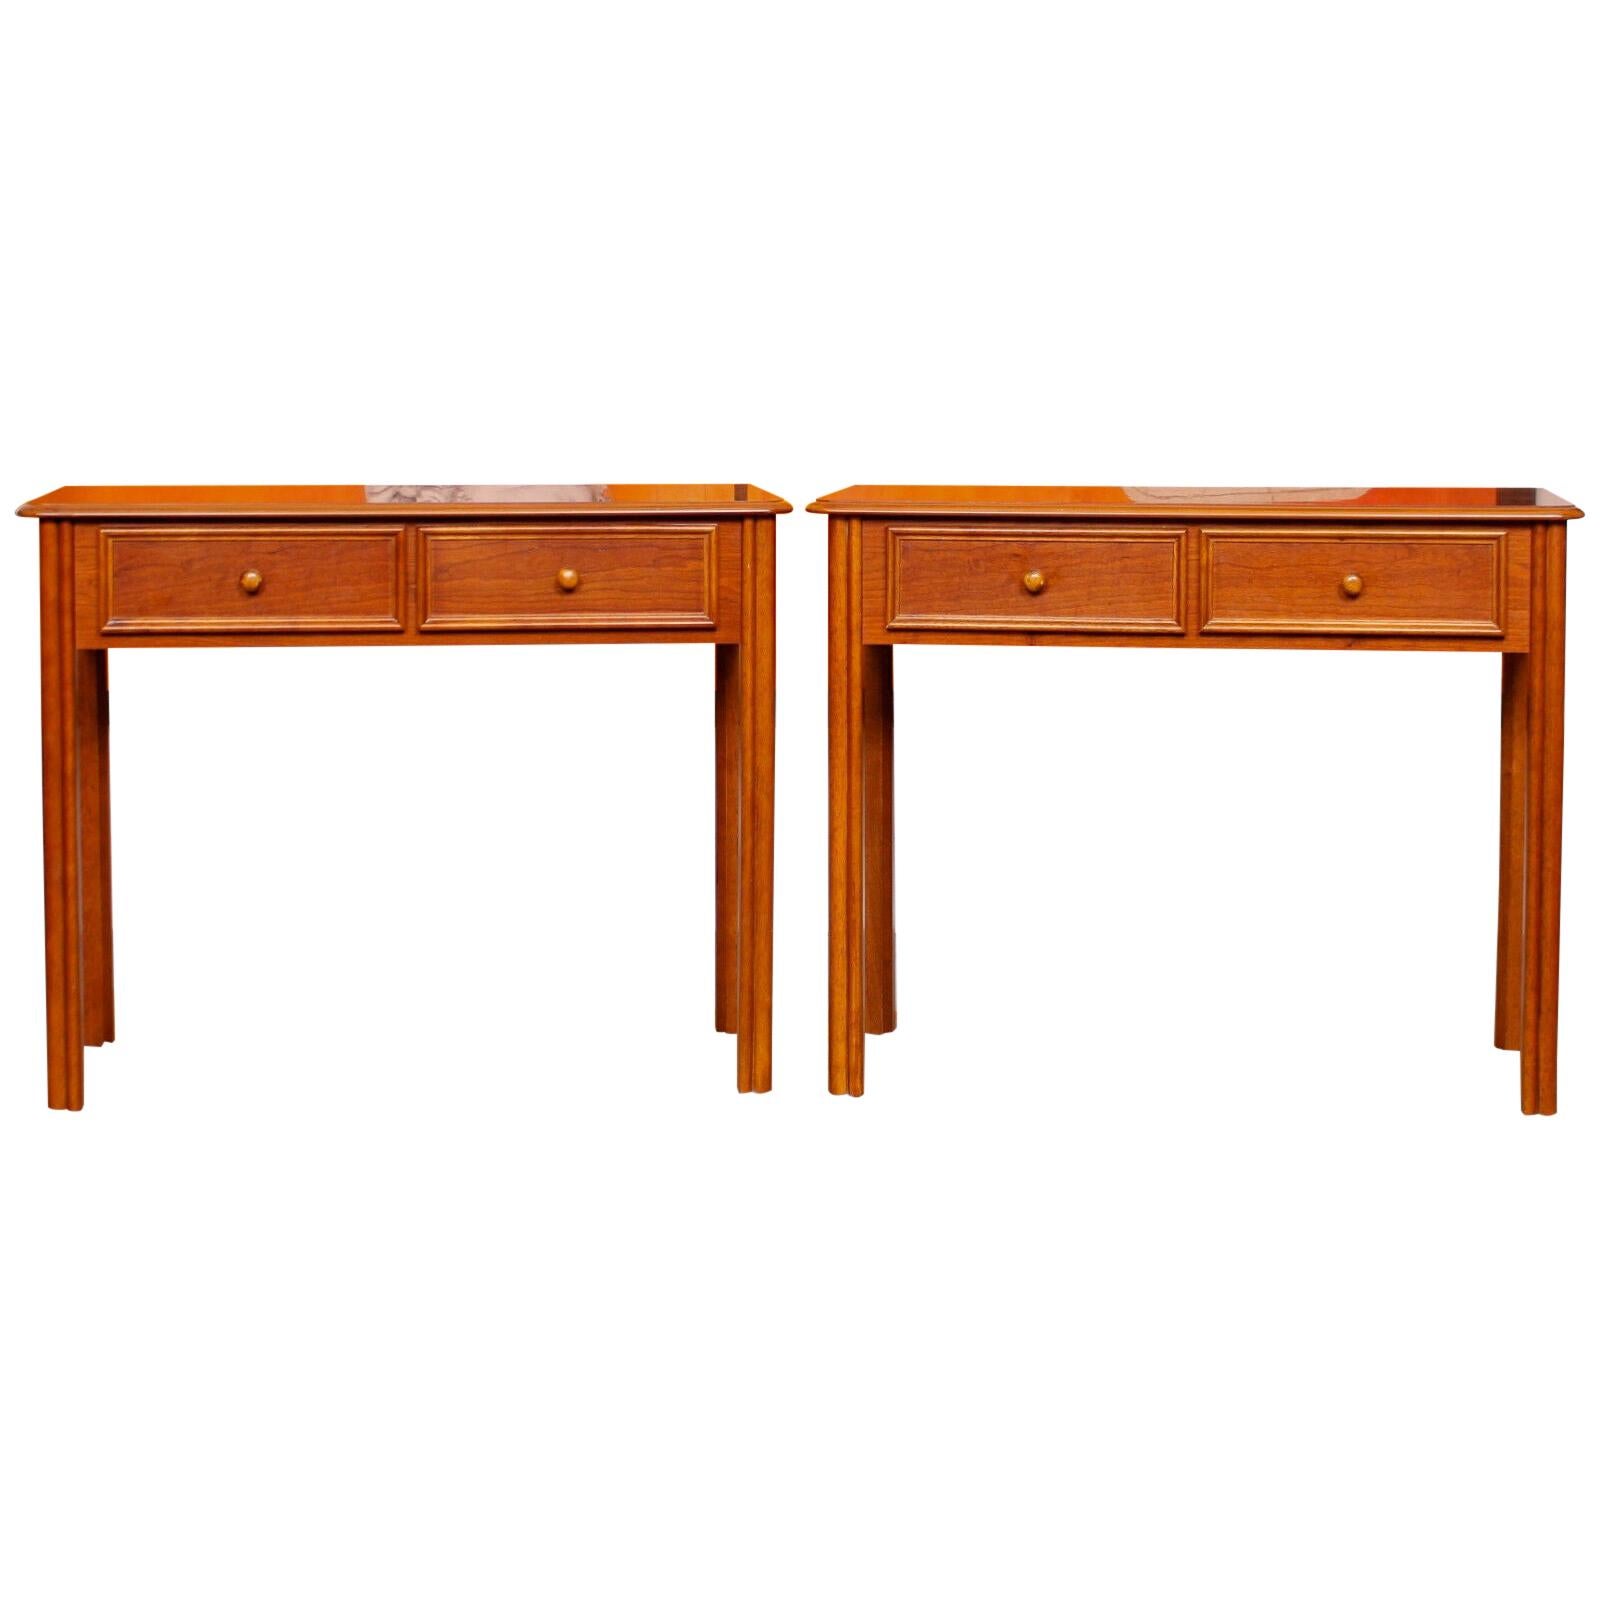 Pair of Writing Desk Tables 2 Fiddleback Mahogany Marquetry